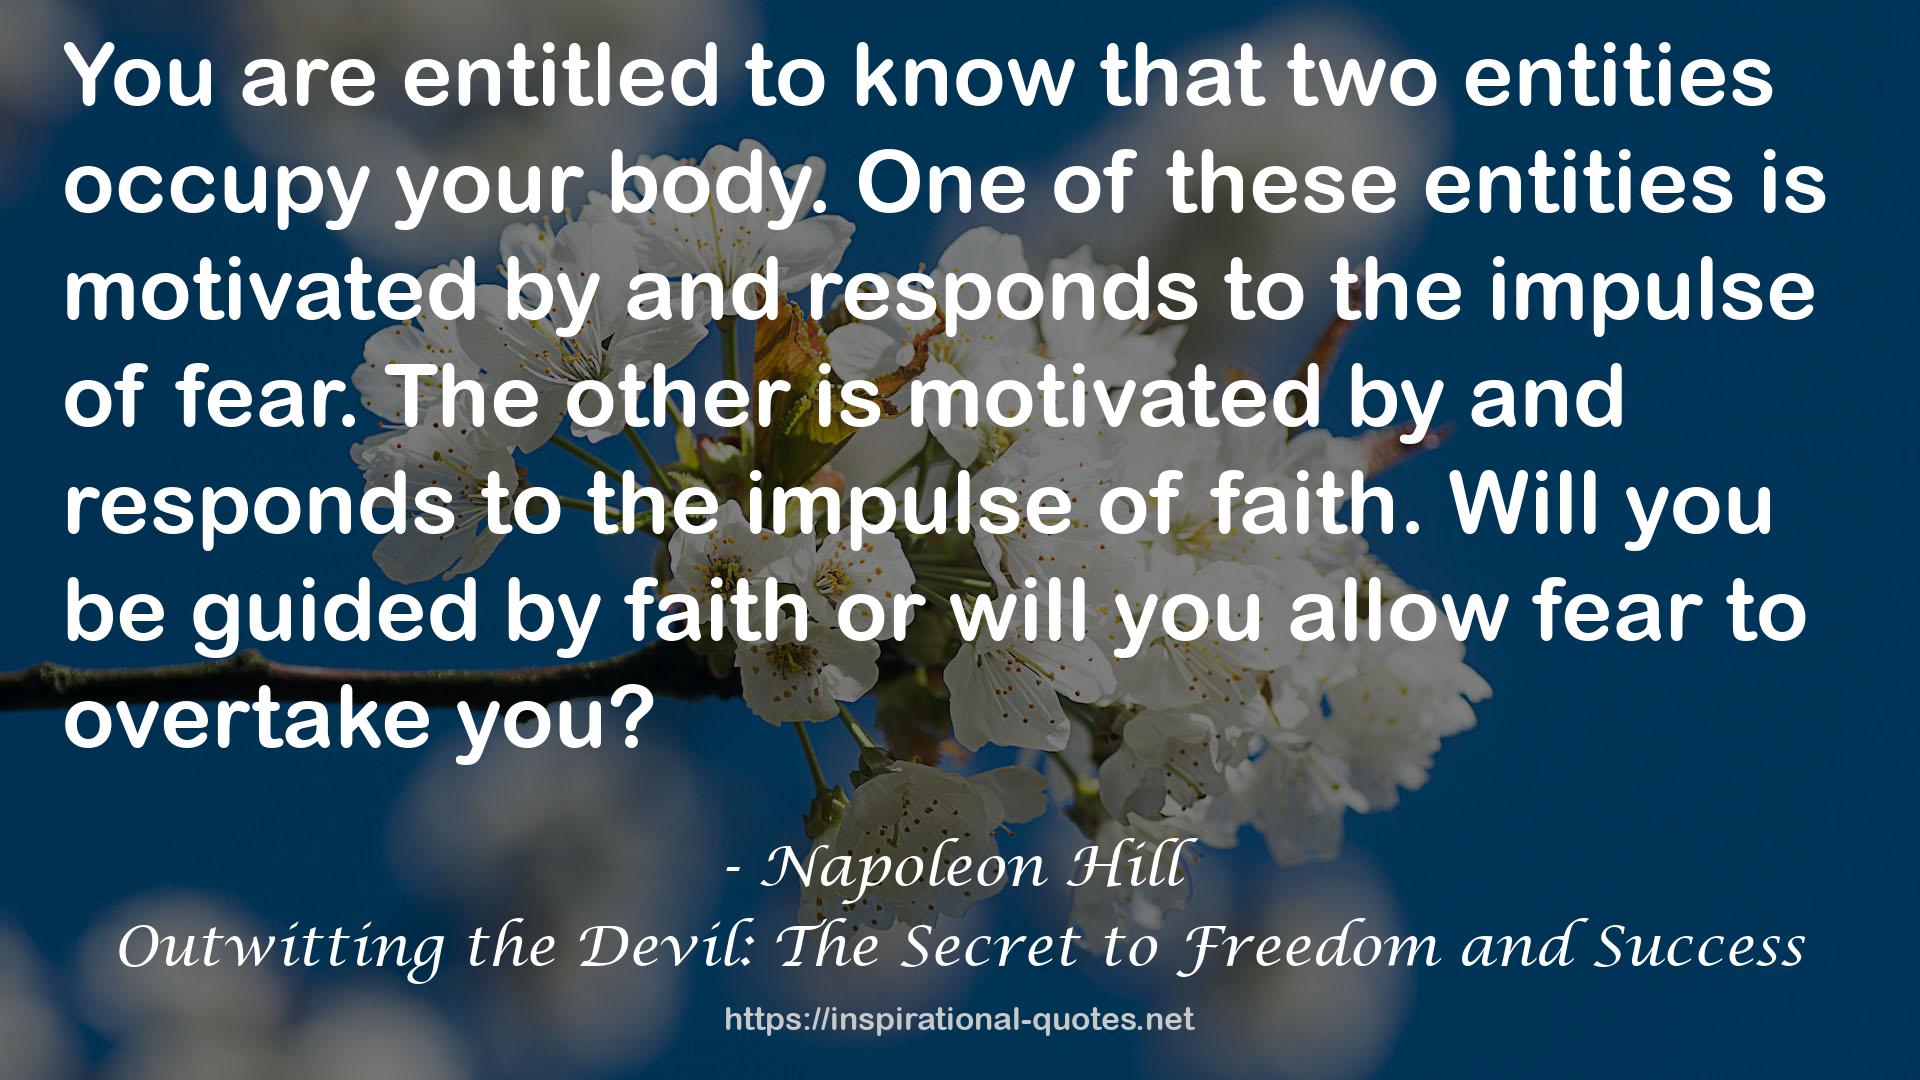 Outwitting the Devil: The Secret to Freedom and Success QUOTES